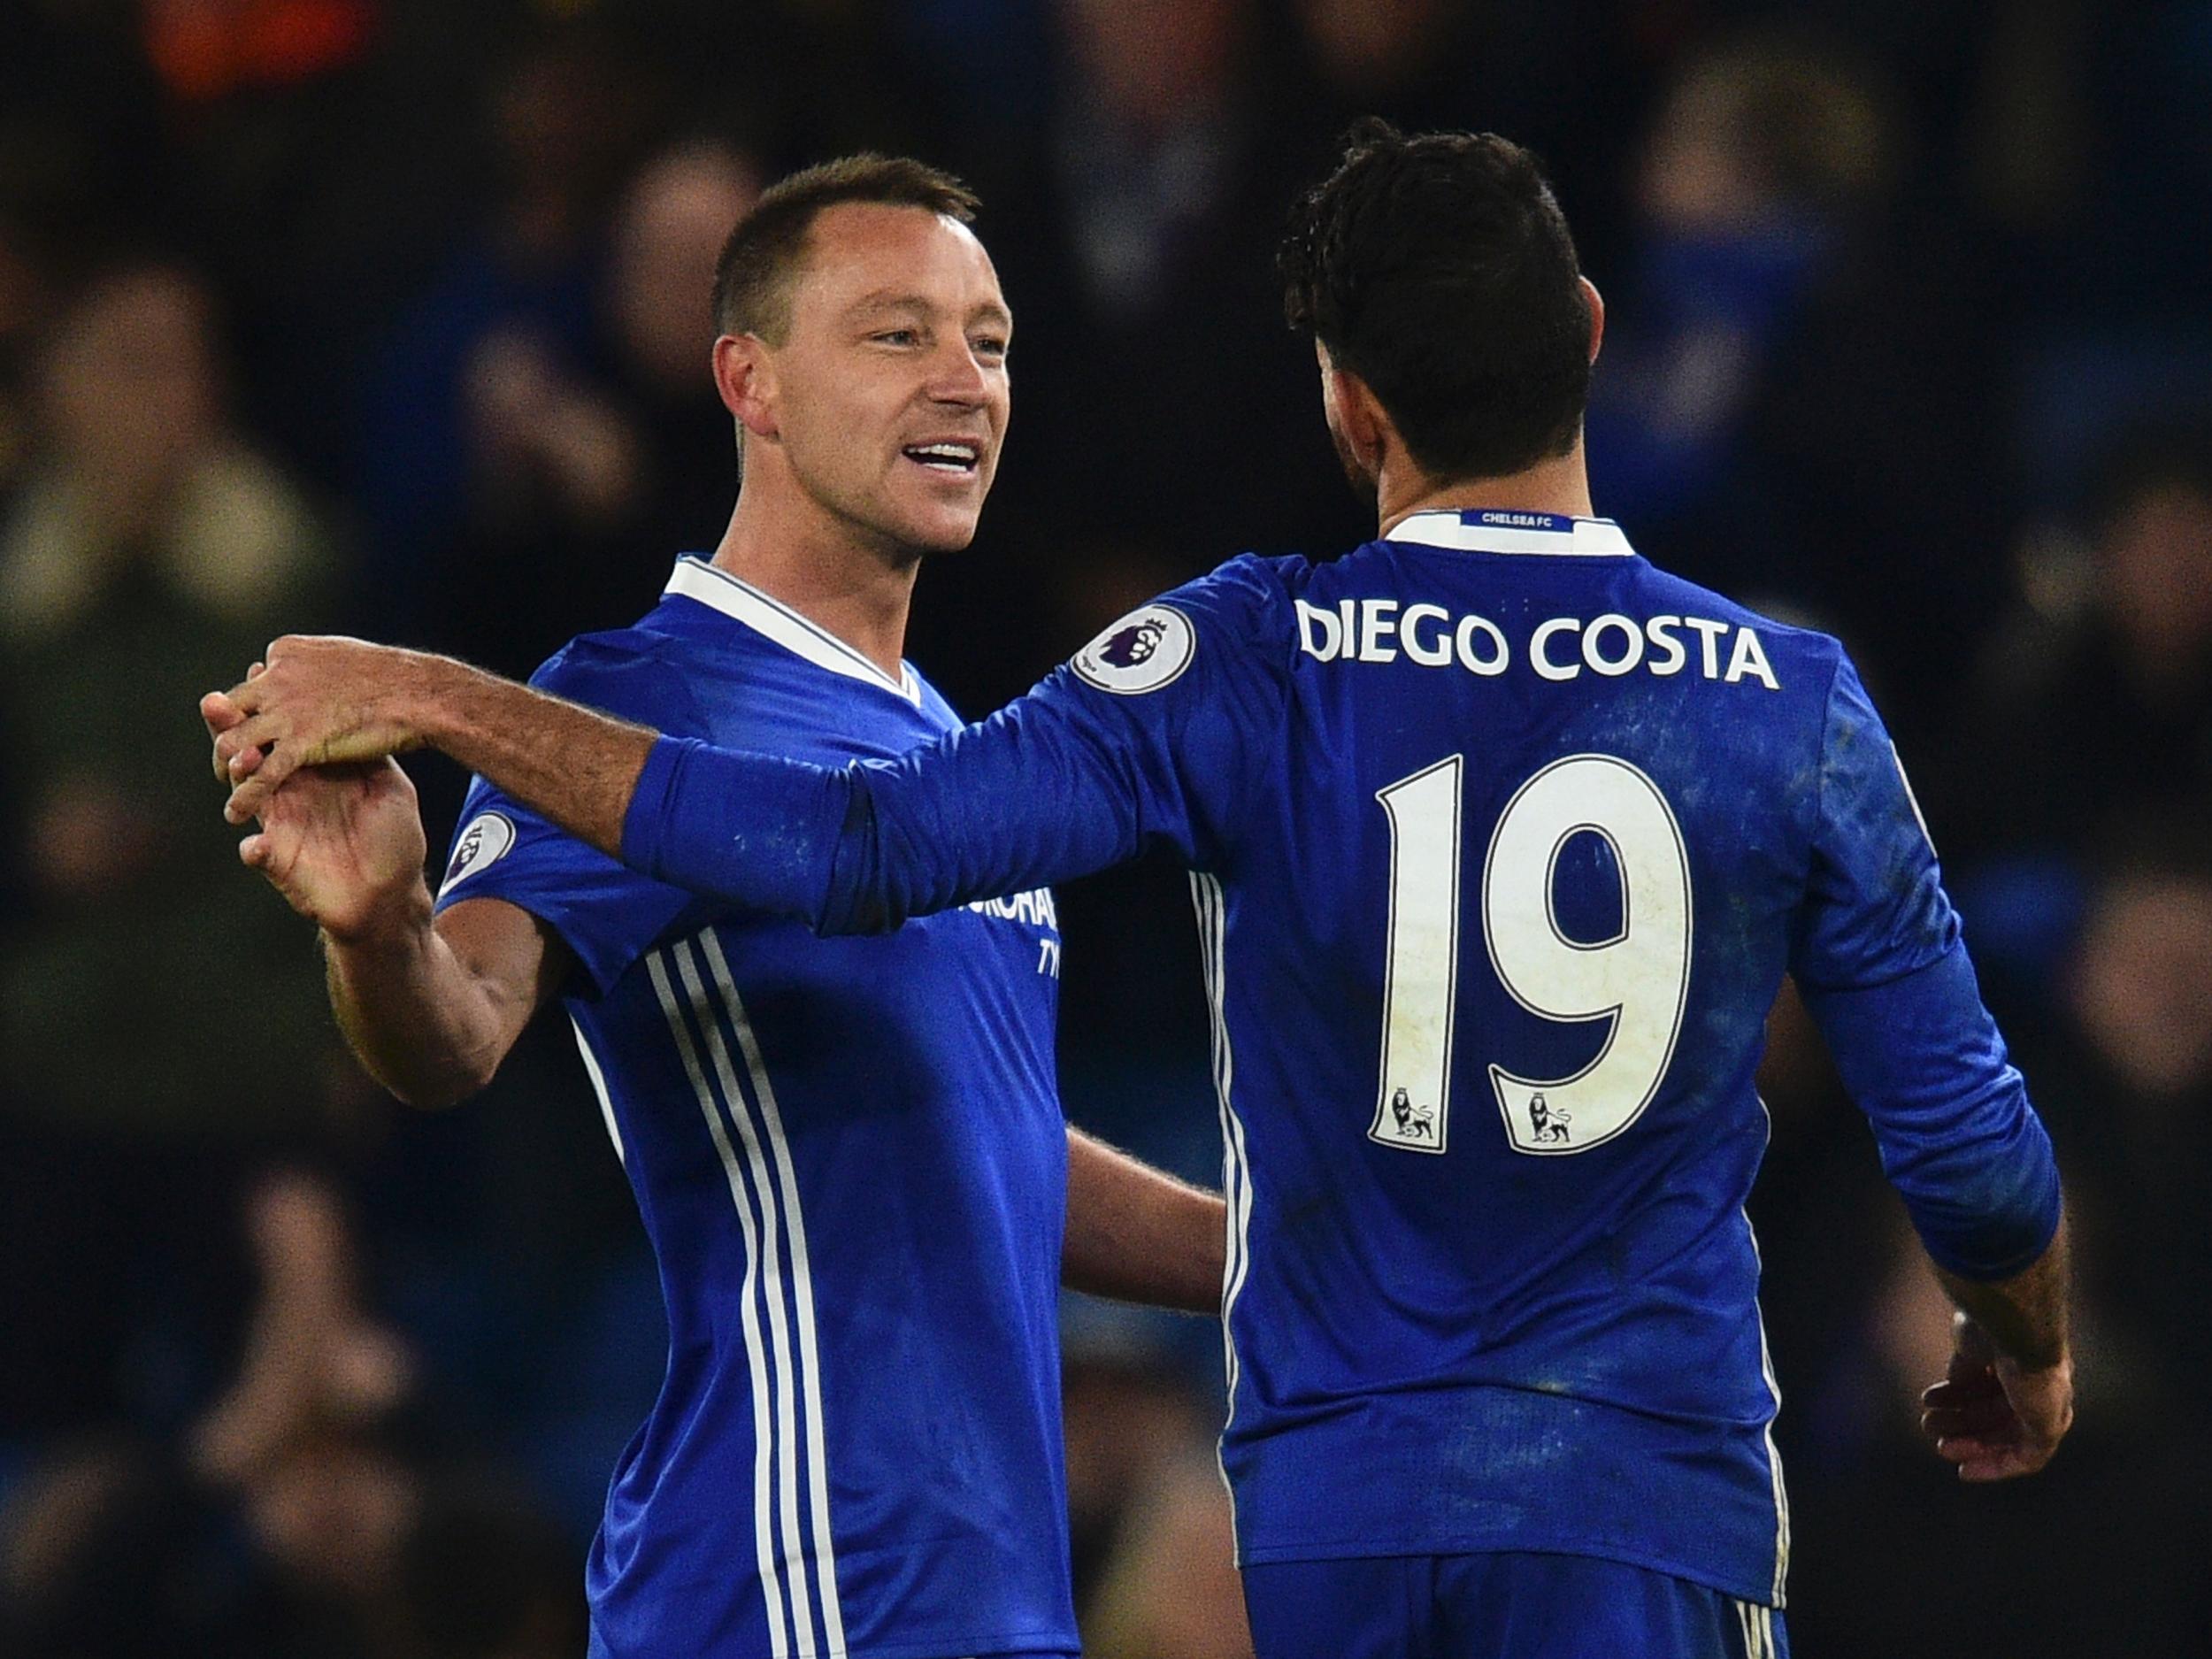 John Terry was '100% certain' to move to the Chinese Super League before rule change, says Gus Poyet - The Independent